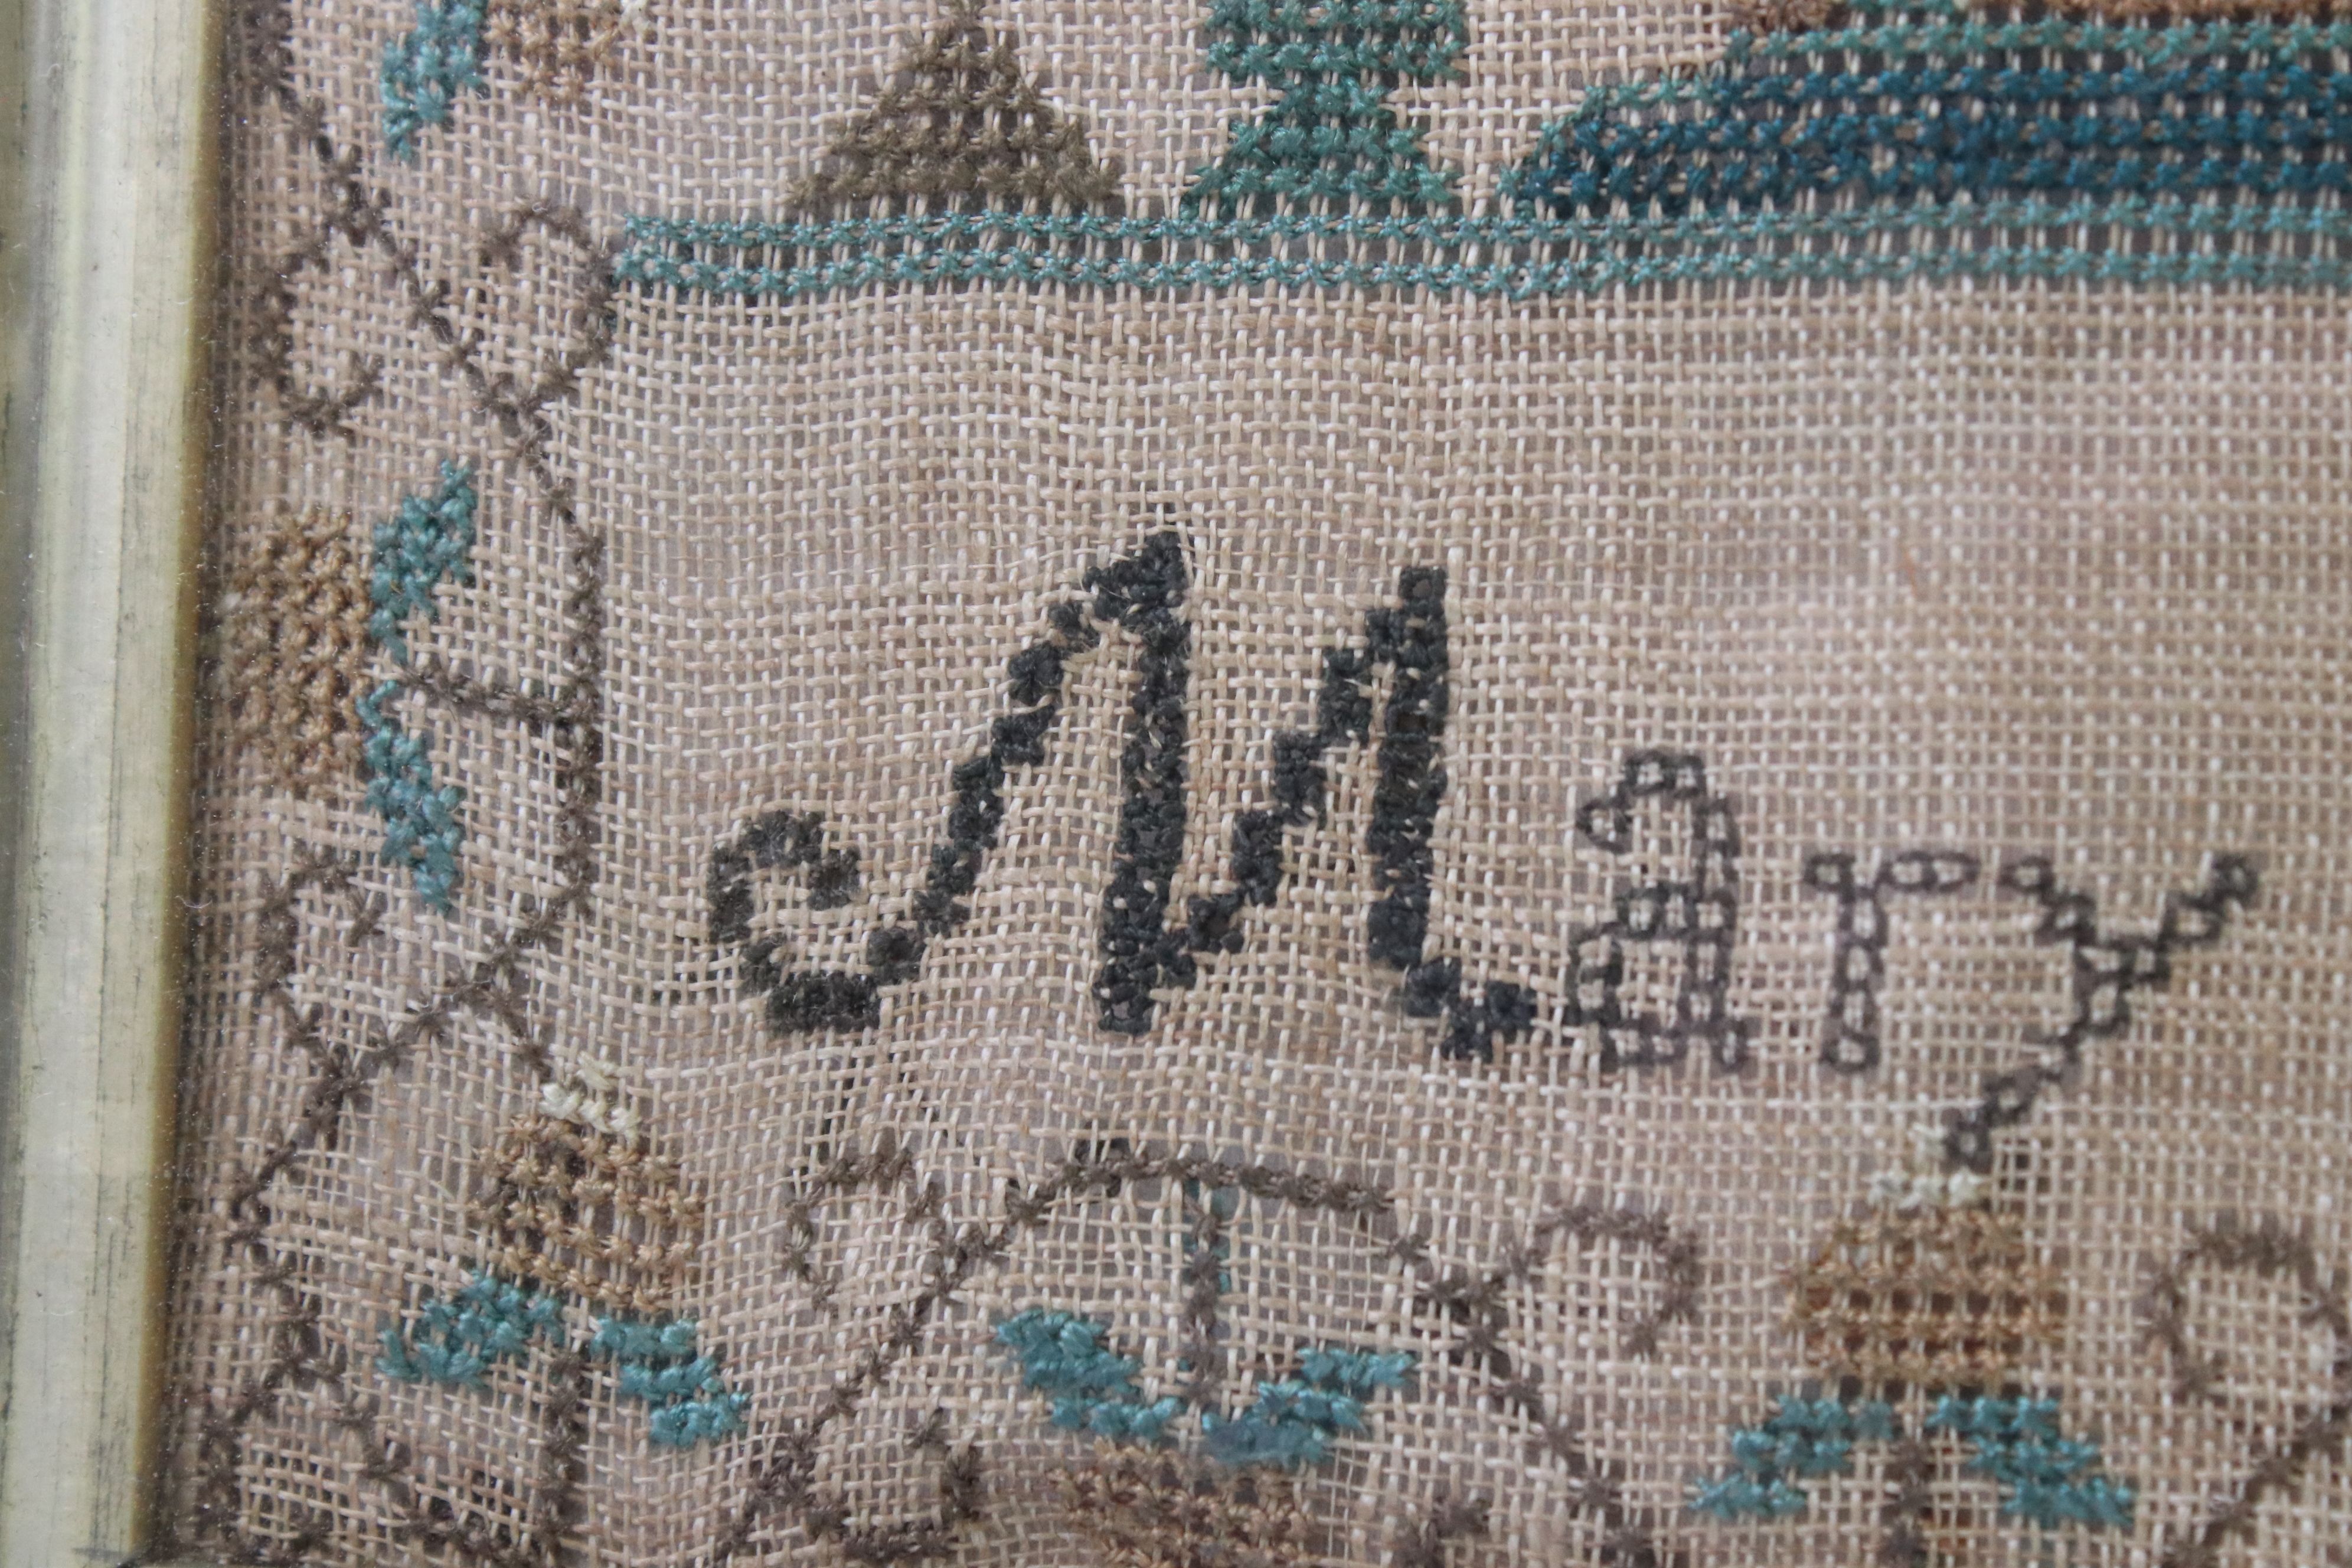 Early 19th century needlework sampler by Mary Bank, dated June 16th 1826, featuring a house, - Image 7 of 7